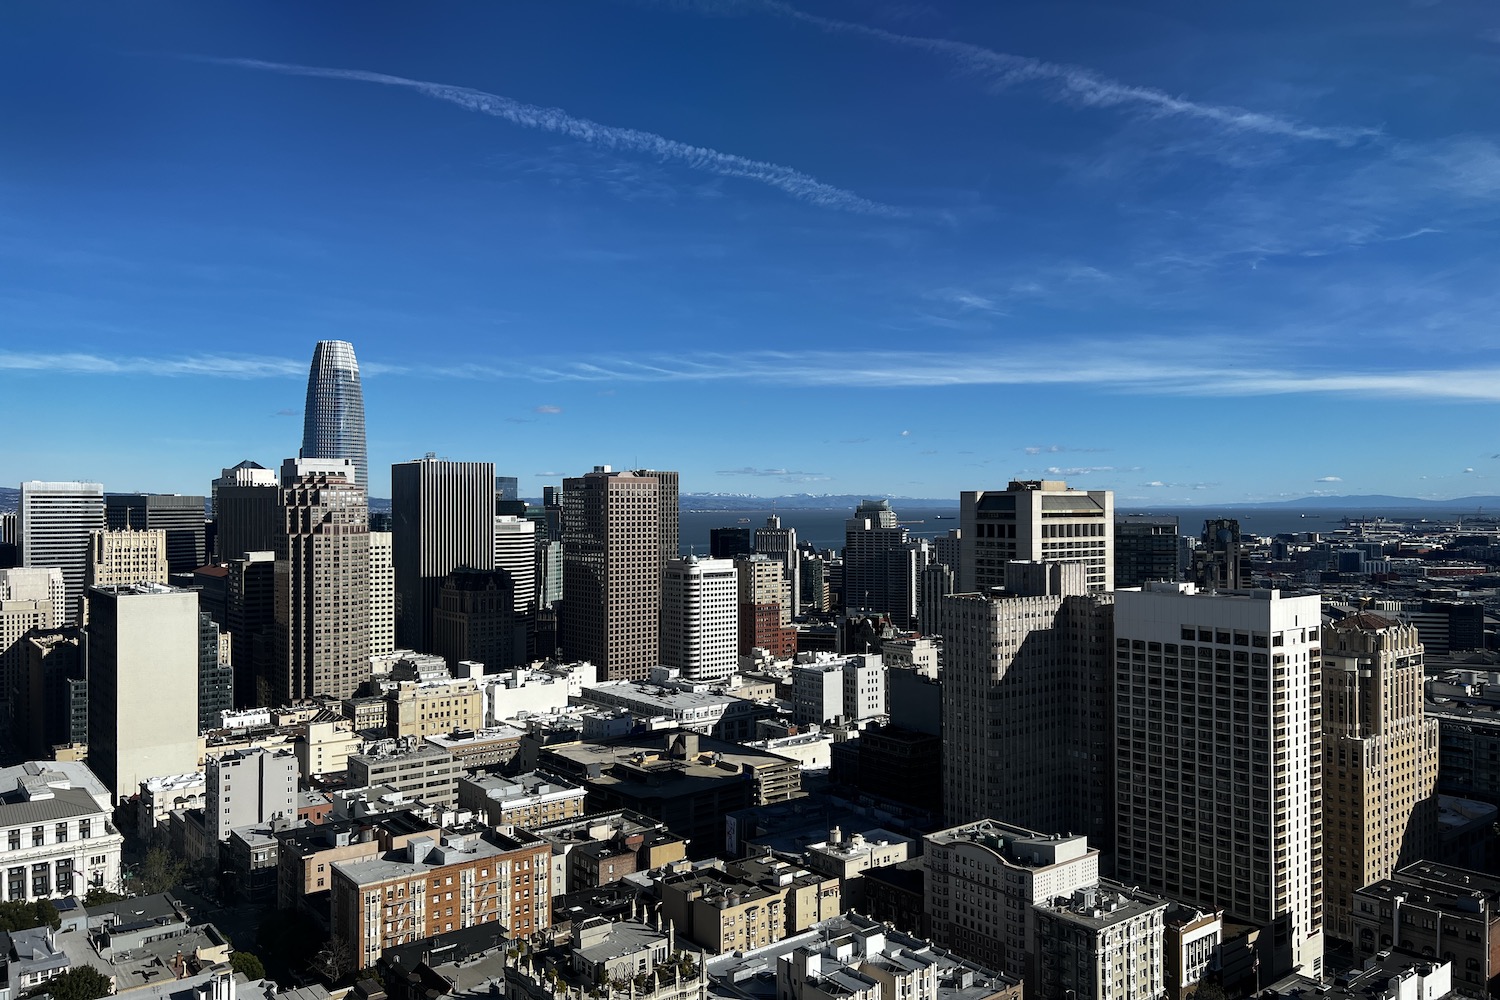 View of San Francisco from a rooftop